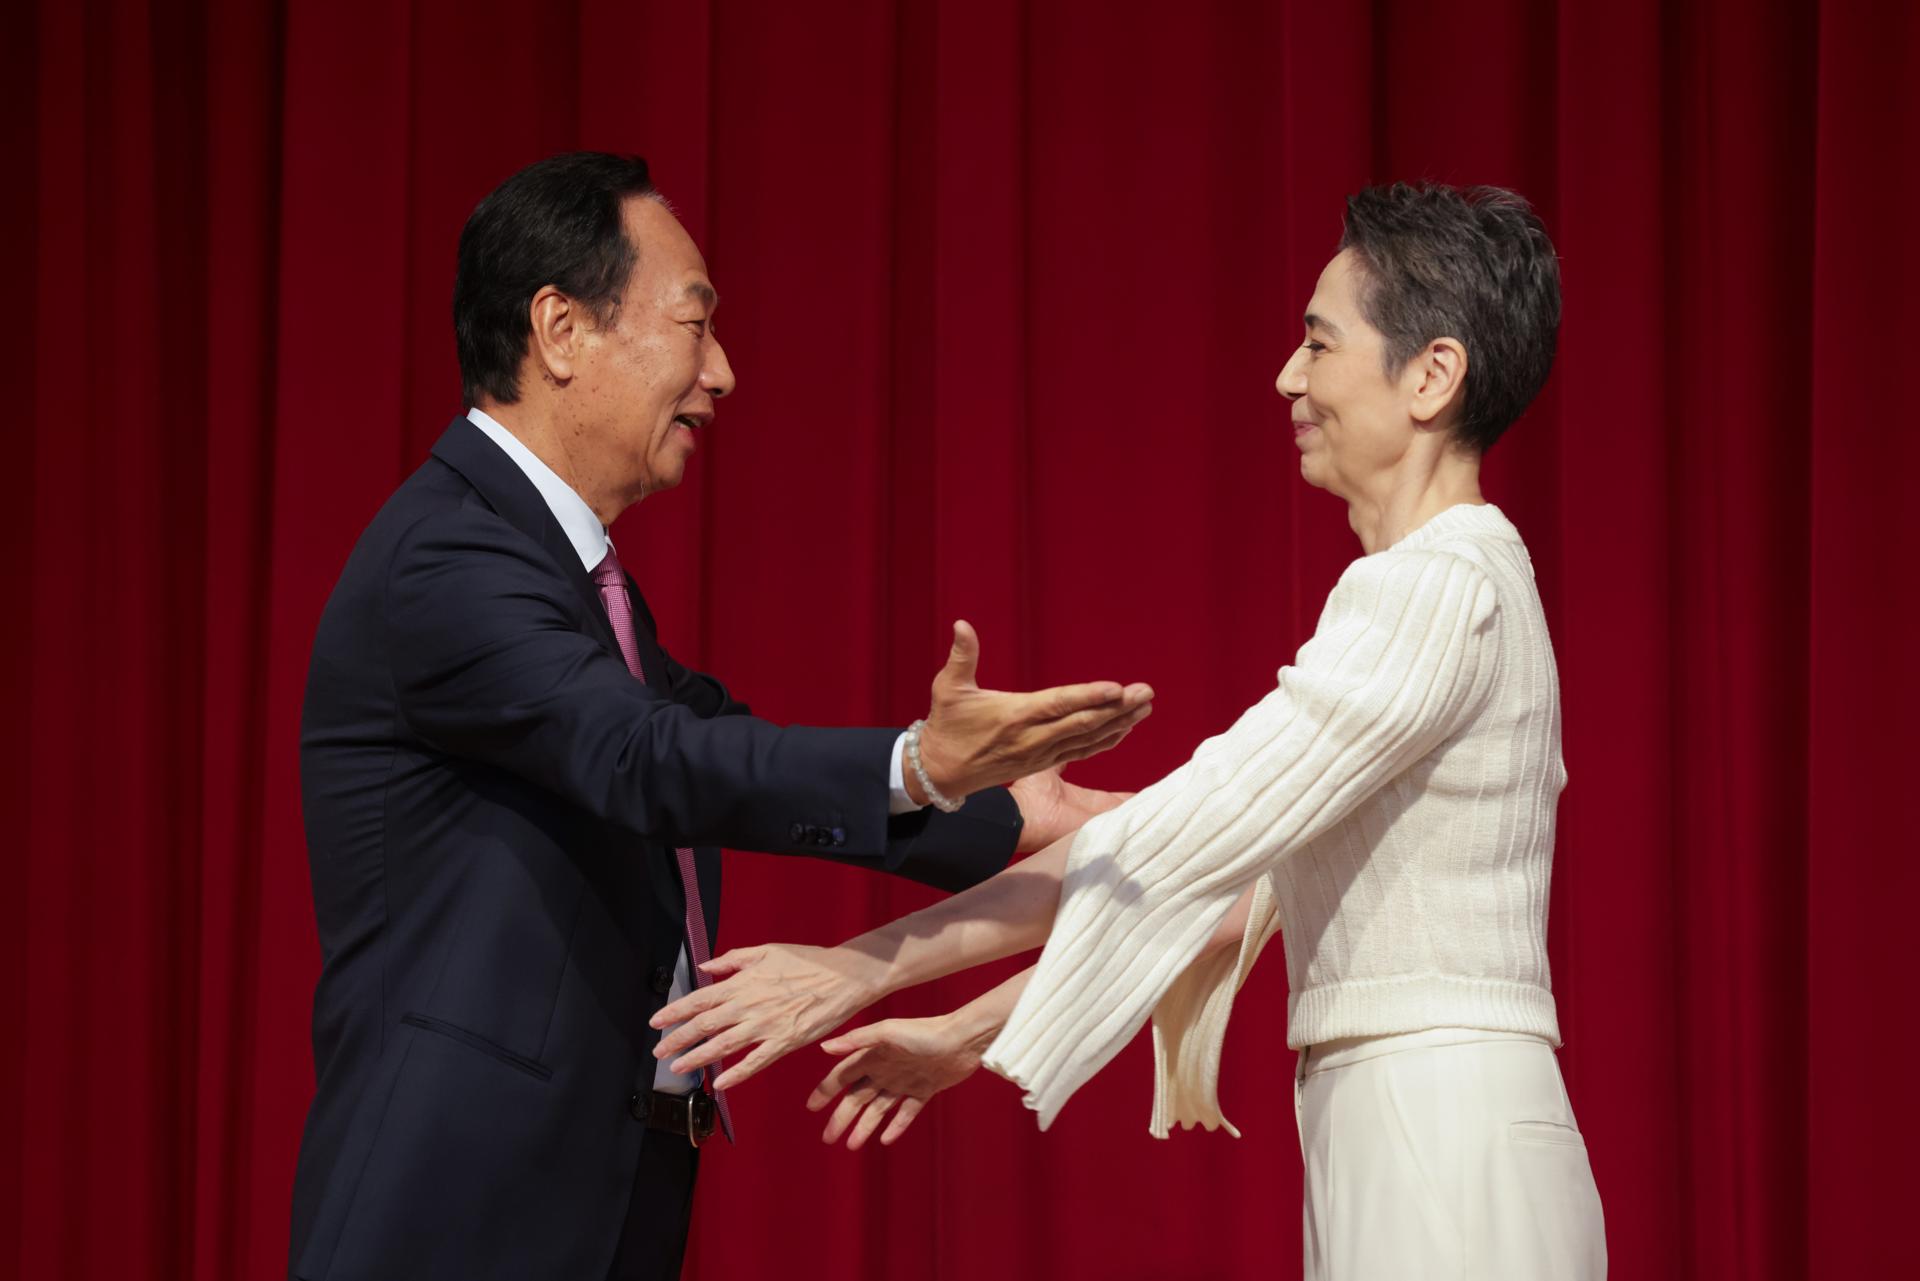 Foxconn founder Terry Gou (L) and running mate Lai Pei-hsia (Tammy) during a press conference in Taipei, Taiwan, 14 September 2023. EFE/EPA/RITCHIE B. TONGO
